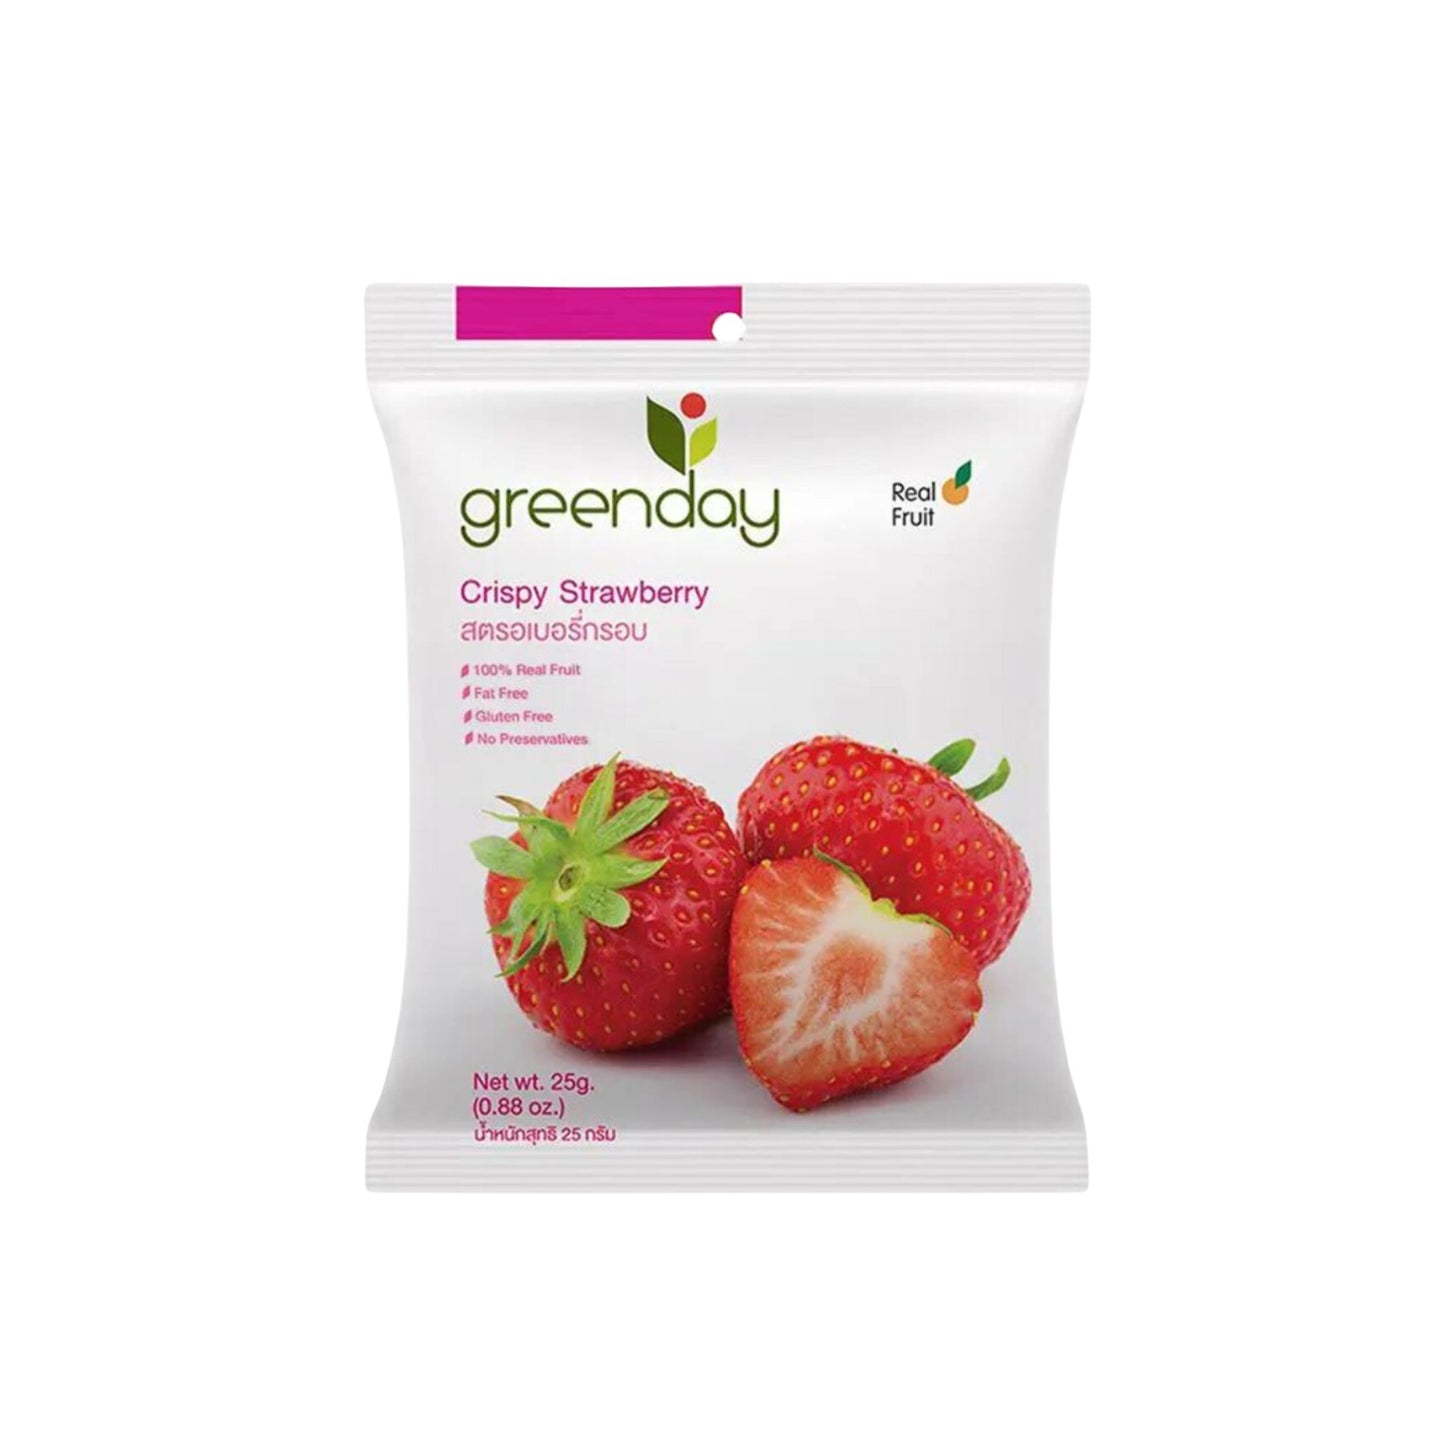 Greenday Crispy Strawberry Snack for Babies and Kids 25g